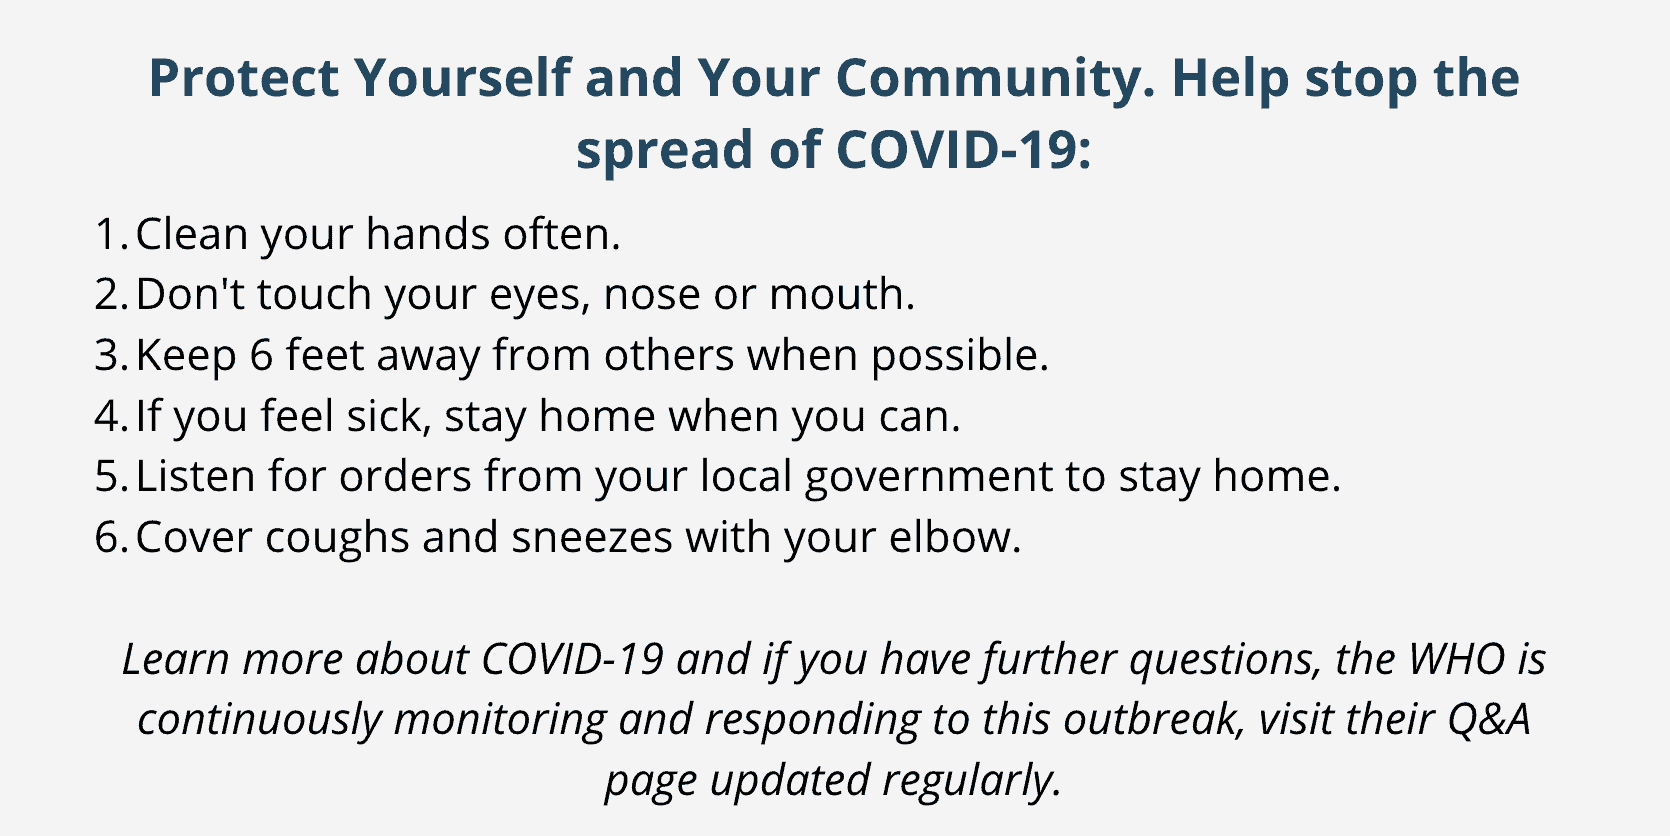 Protect Yourself and Your Community. Help stop the spread of COVID-19: Clean your hands often. Don't touch your eyes, nose or mouth. Keep 6 feet away from others when possible. If you feel sick, stay home when you can. Listen for orders from your local government to stay home. Cover coughs and sneezes with your elbow. Learn more about COVID-19 and if you have further questions, the WHO is continuously monitoring and responding to this outbreak, visit their Q&A page updated regularly.